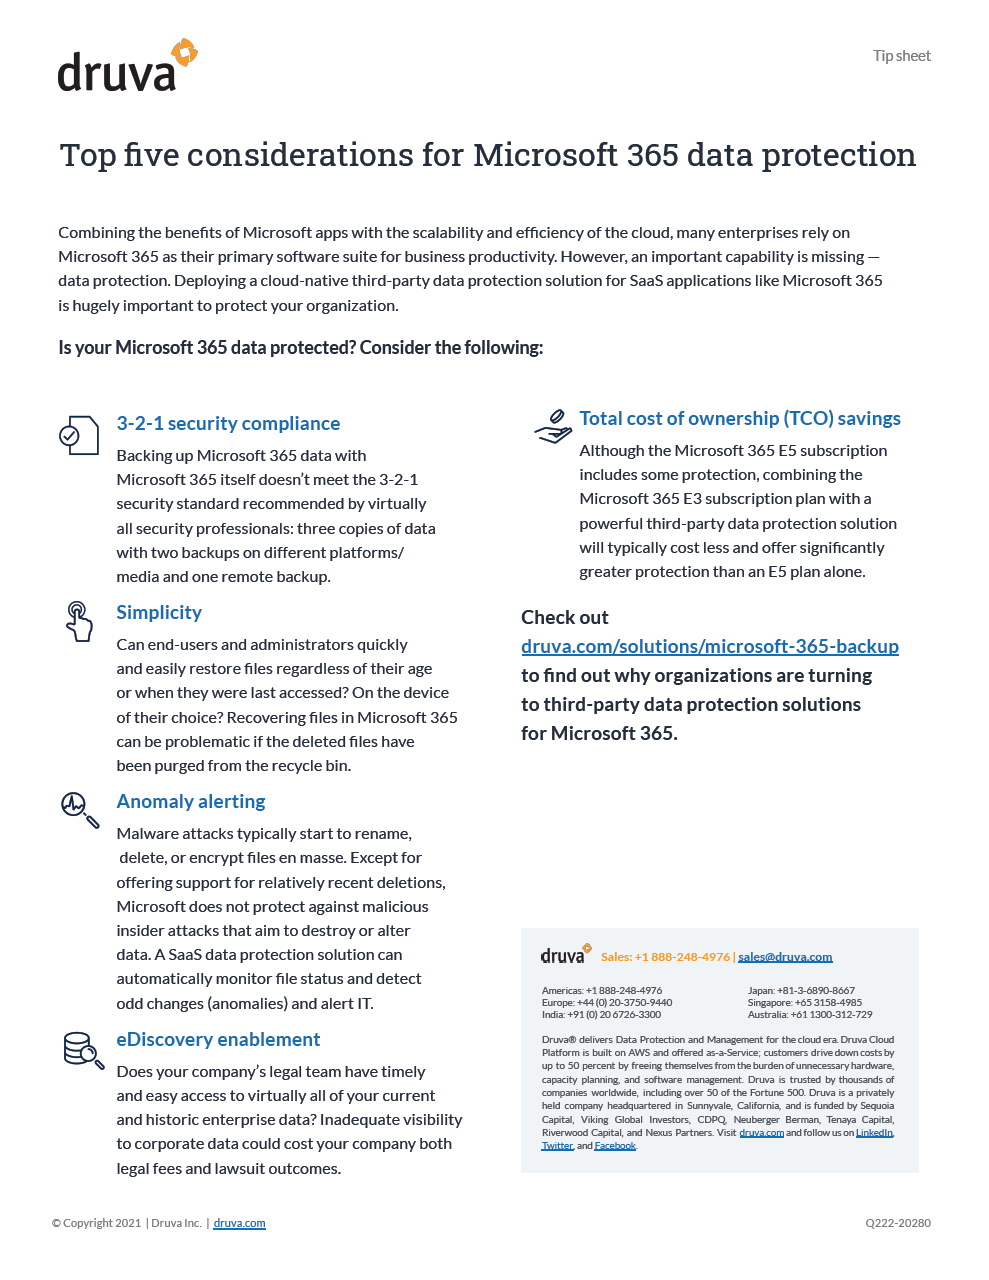 Top five considerations for Microsoft 365 data protection